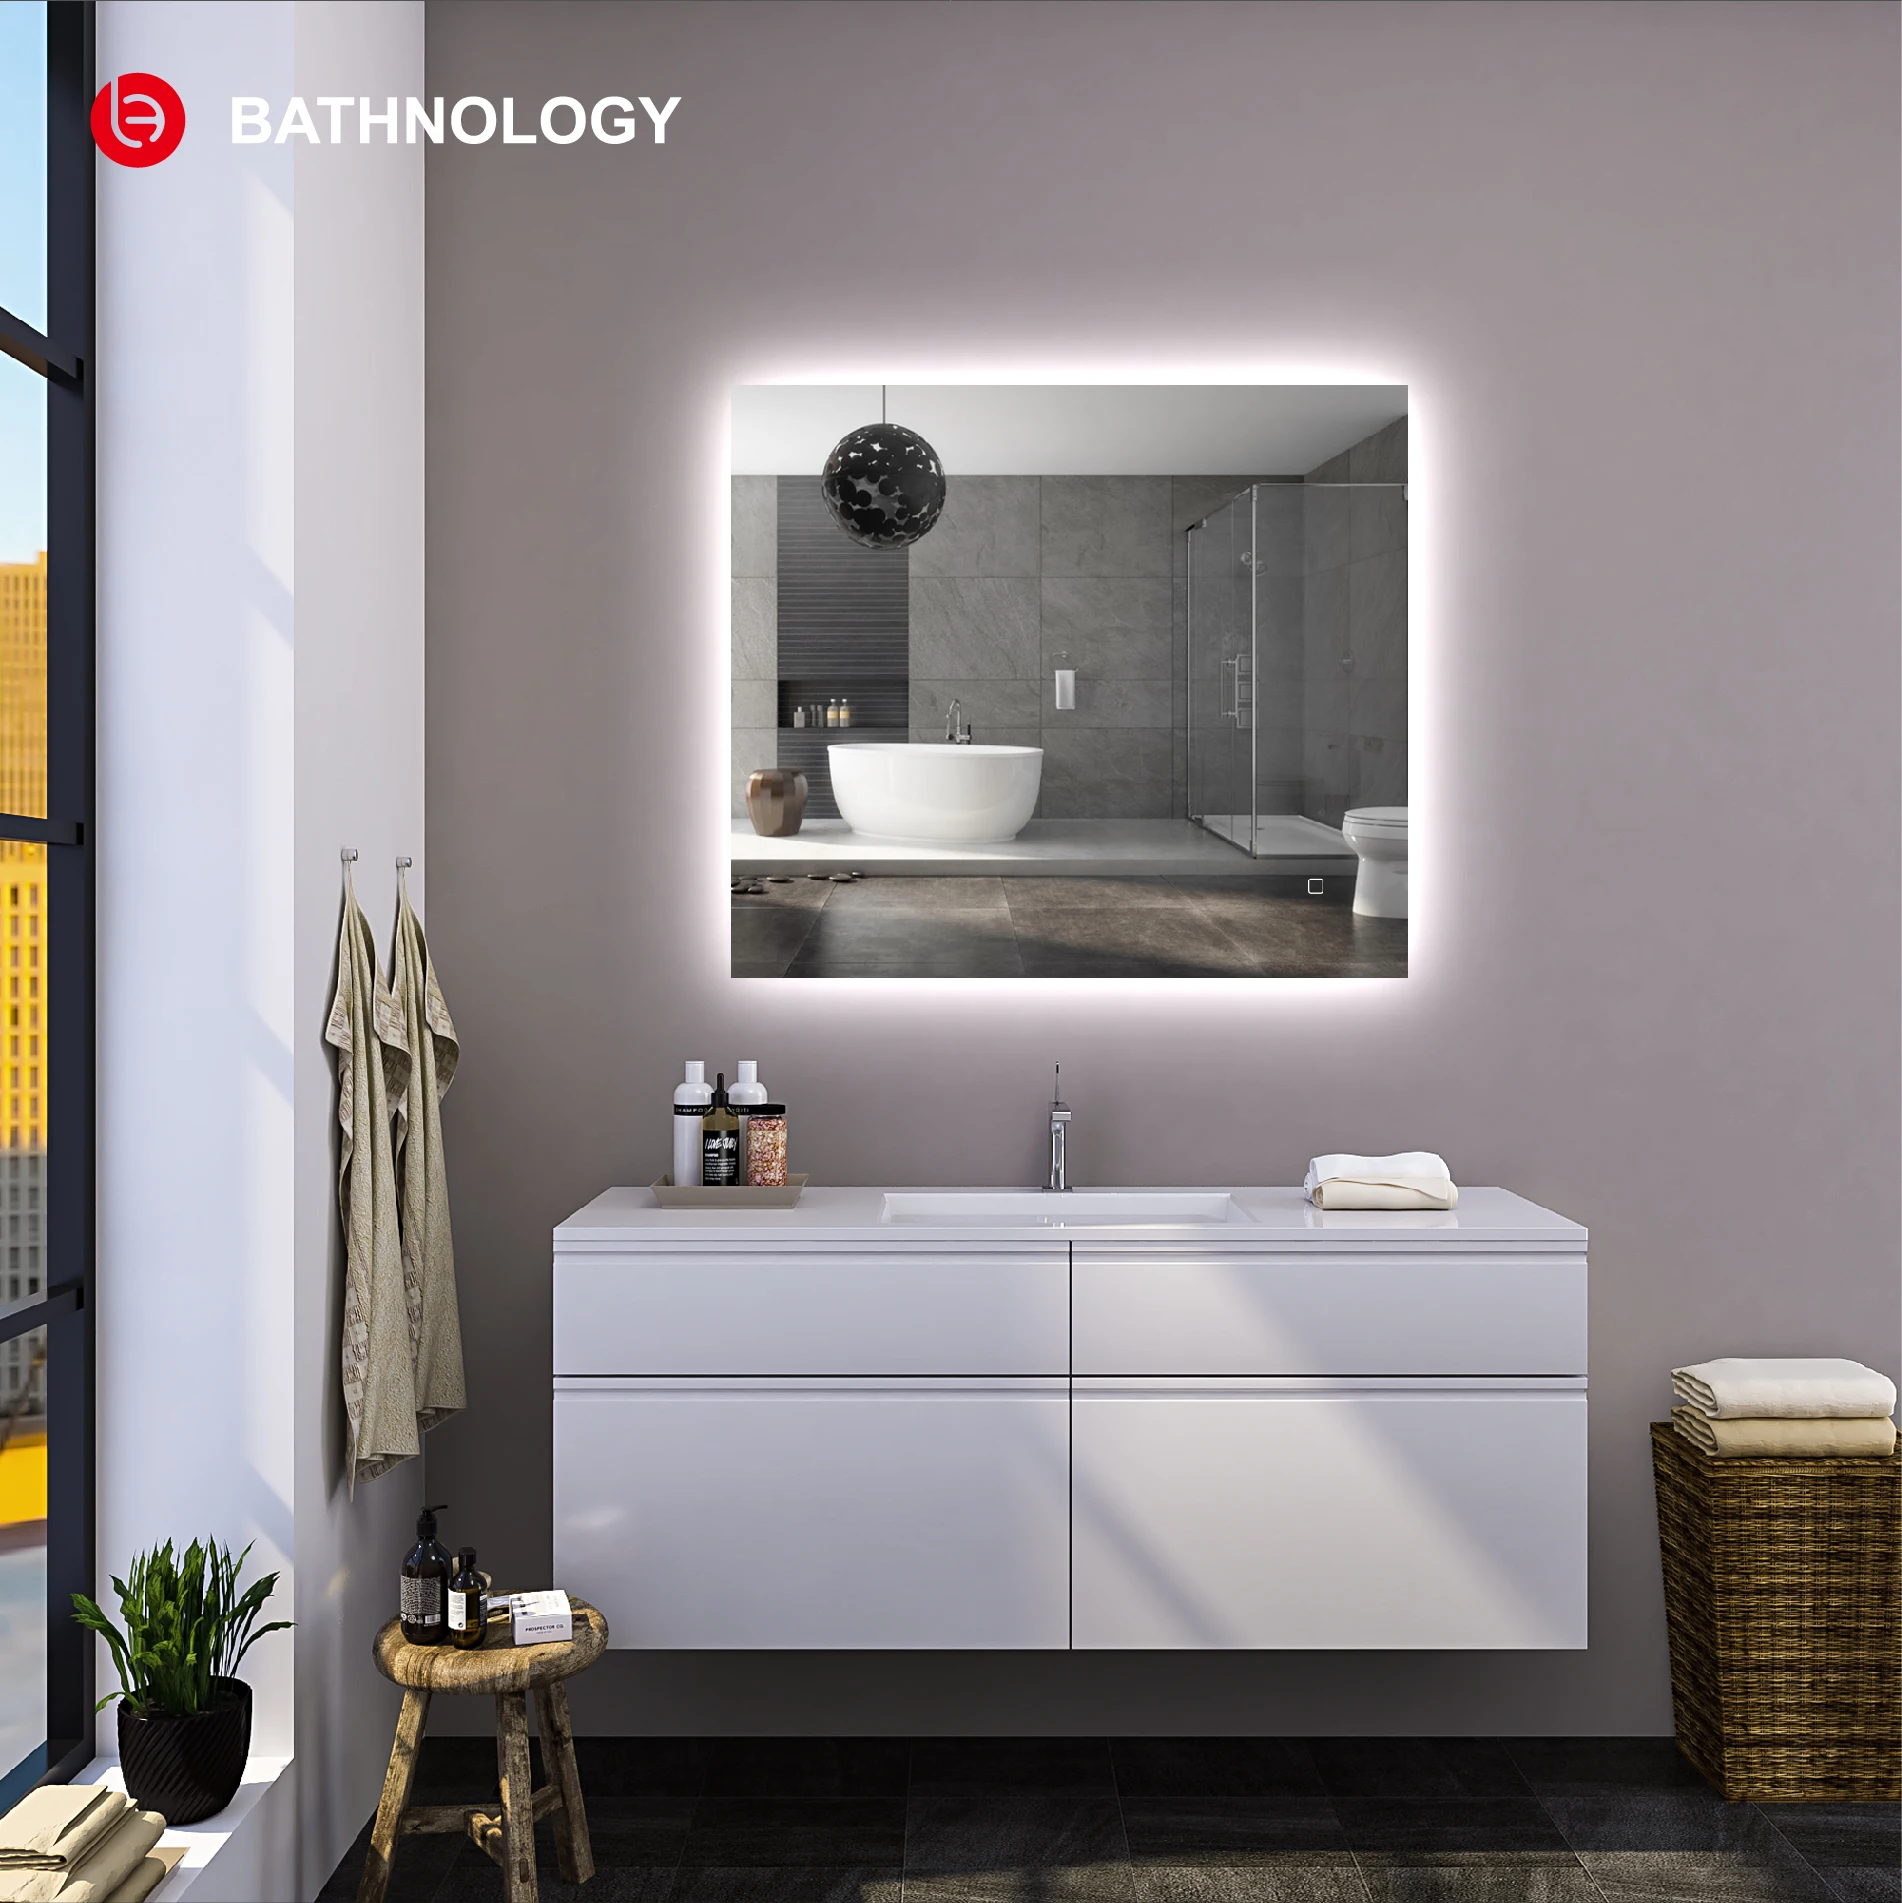 Copper Free Silver Bathroom Mirror Led Touch Smart Mirror Rectangle MDR70-80 5mm Illuminated Magnifying Graphic Design Modern